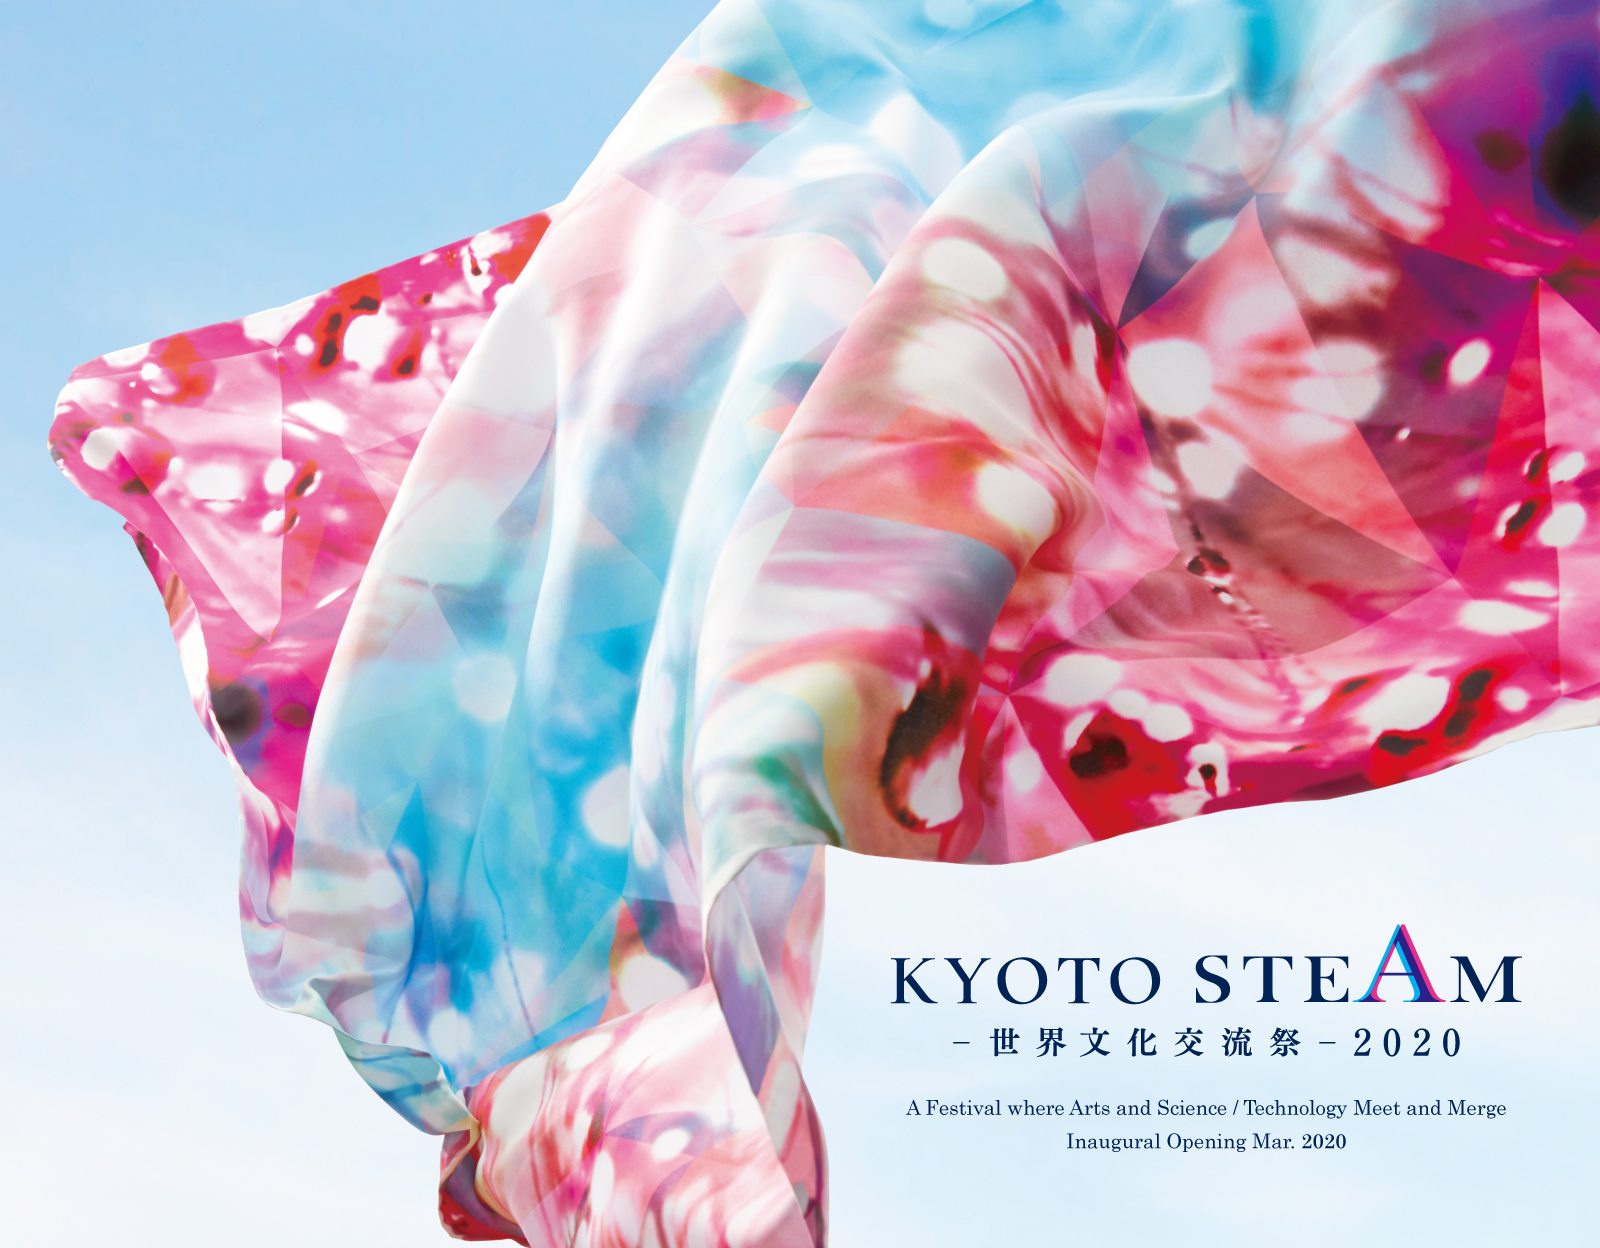 KYOTO STEAM －世界文化交流祭－2020 A Festival where Arts and Science / Technology Meet and Merge. Inaugual Opening Mar.2020